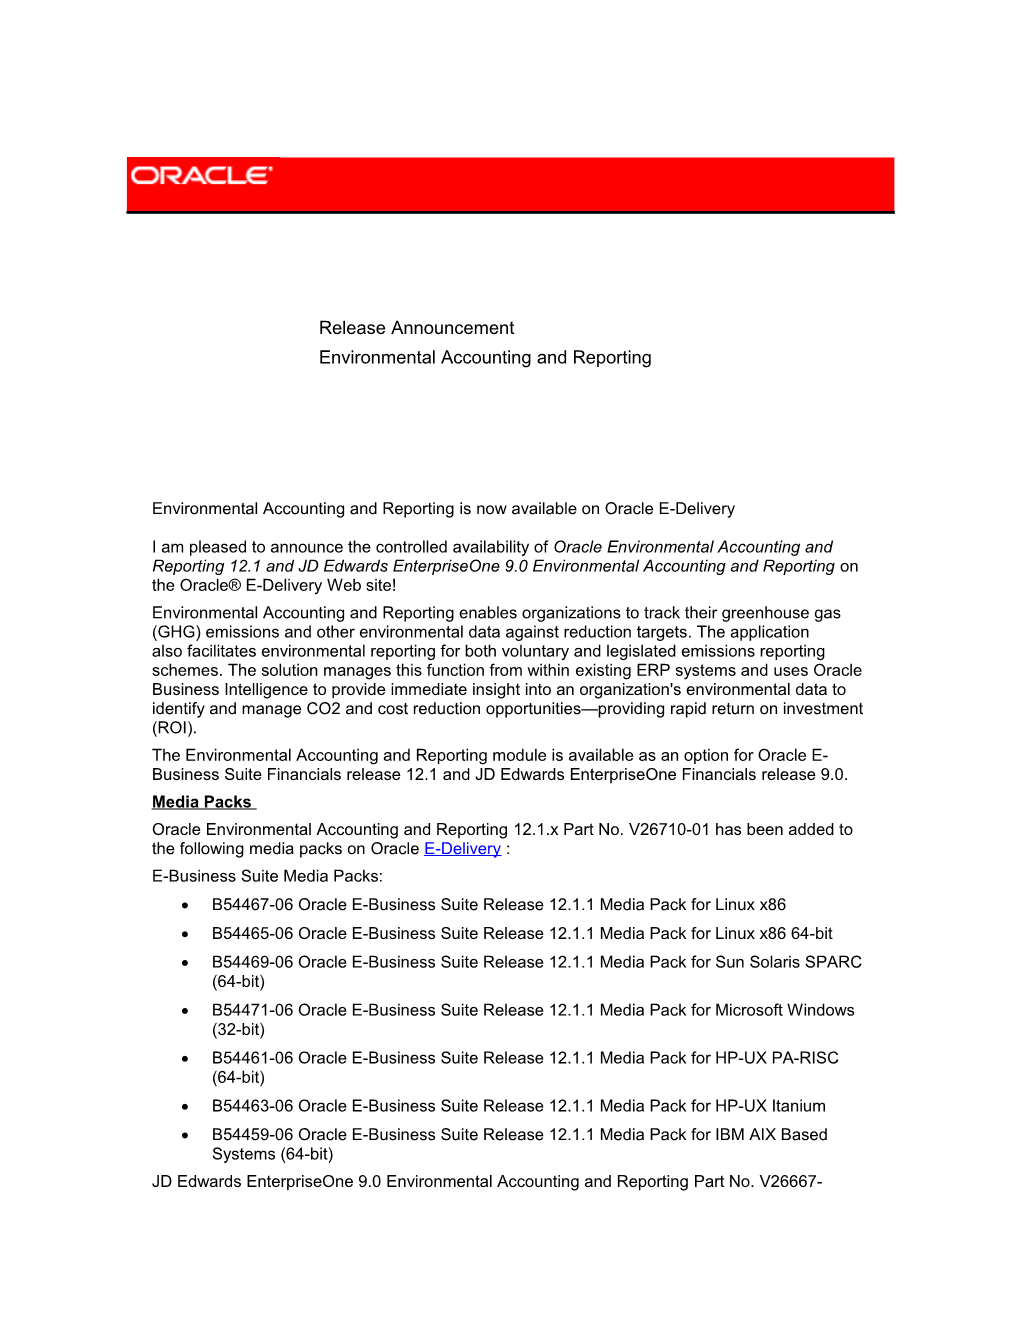 B54467-06 Oracle E-Business Suite Release 12.1.1 Media Pack for Linux X86